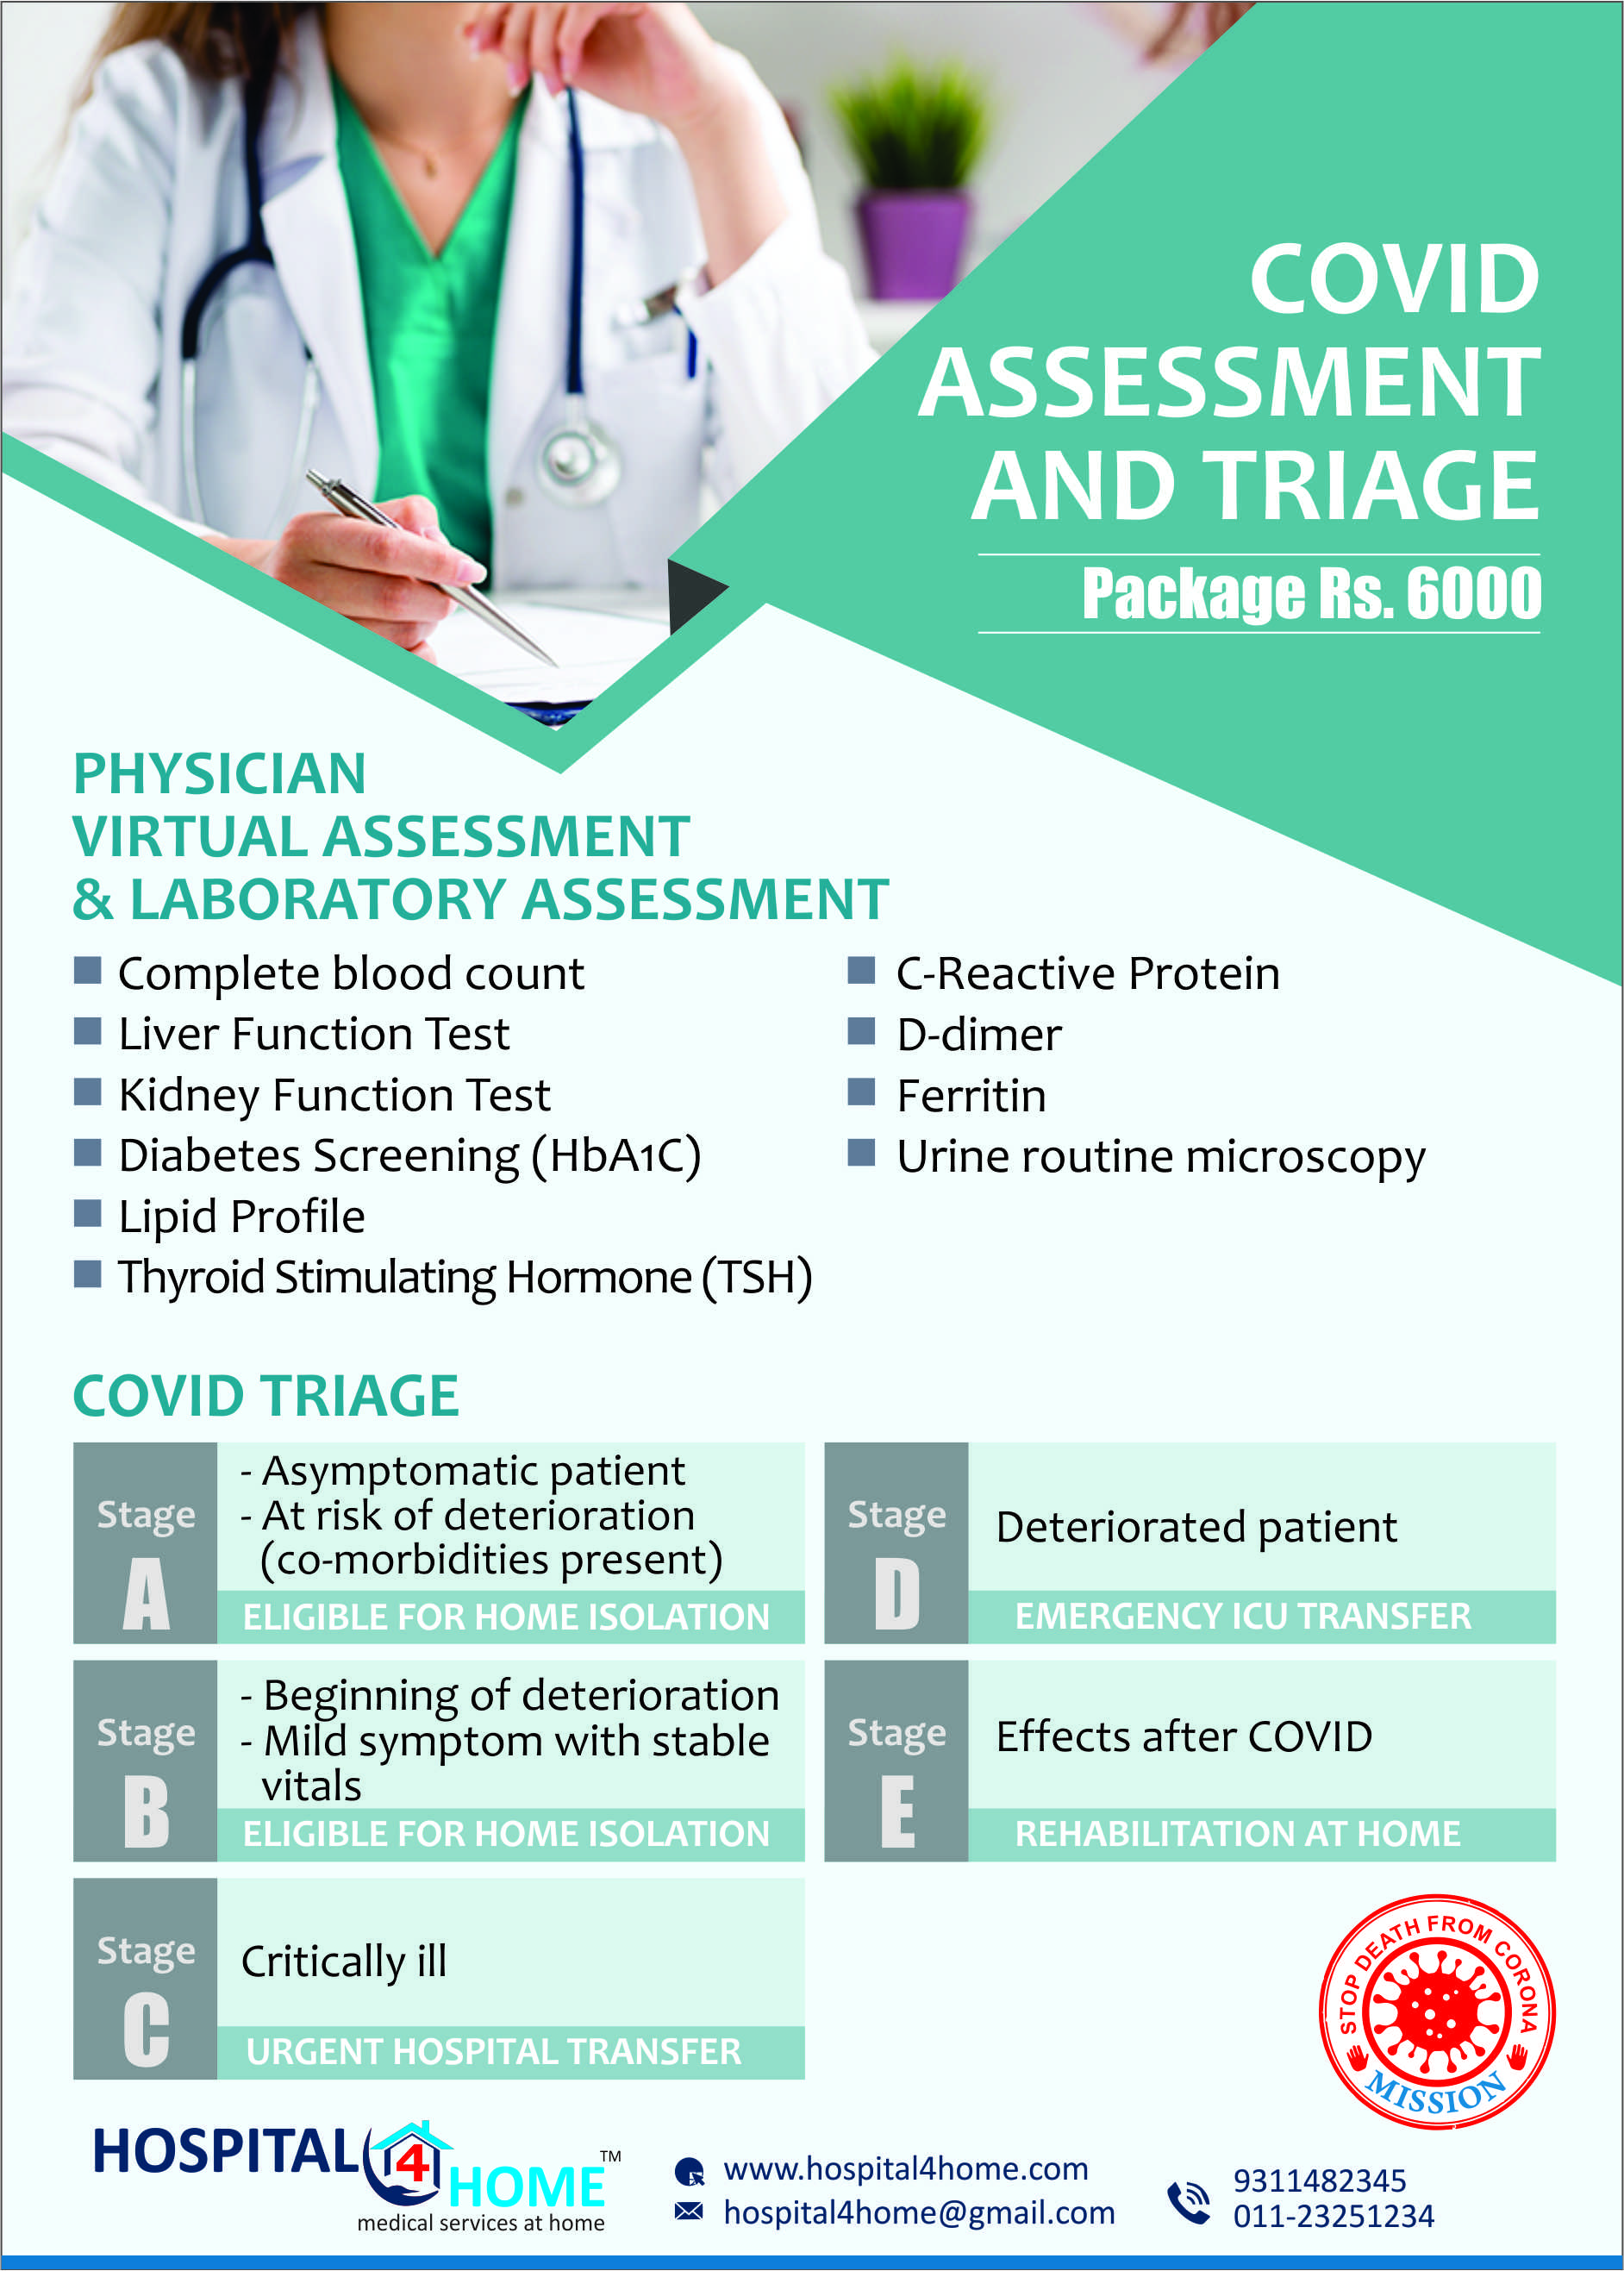 COVID ASSESSMENT & TRIAGE